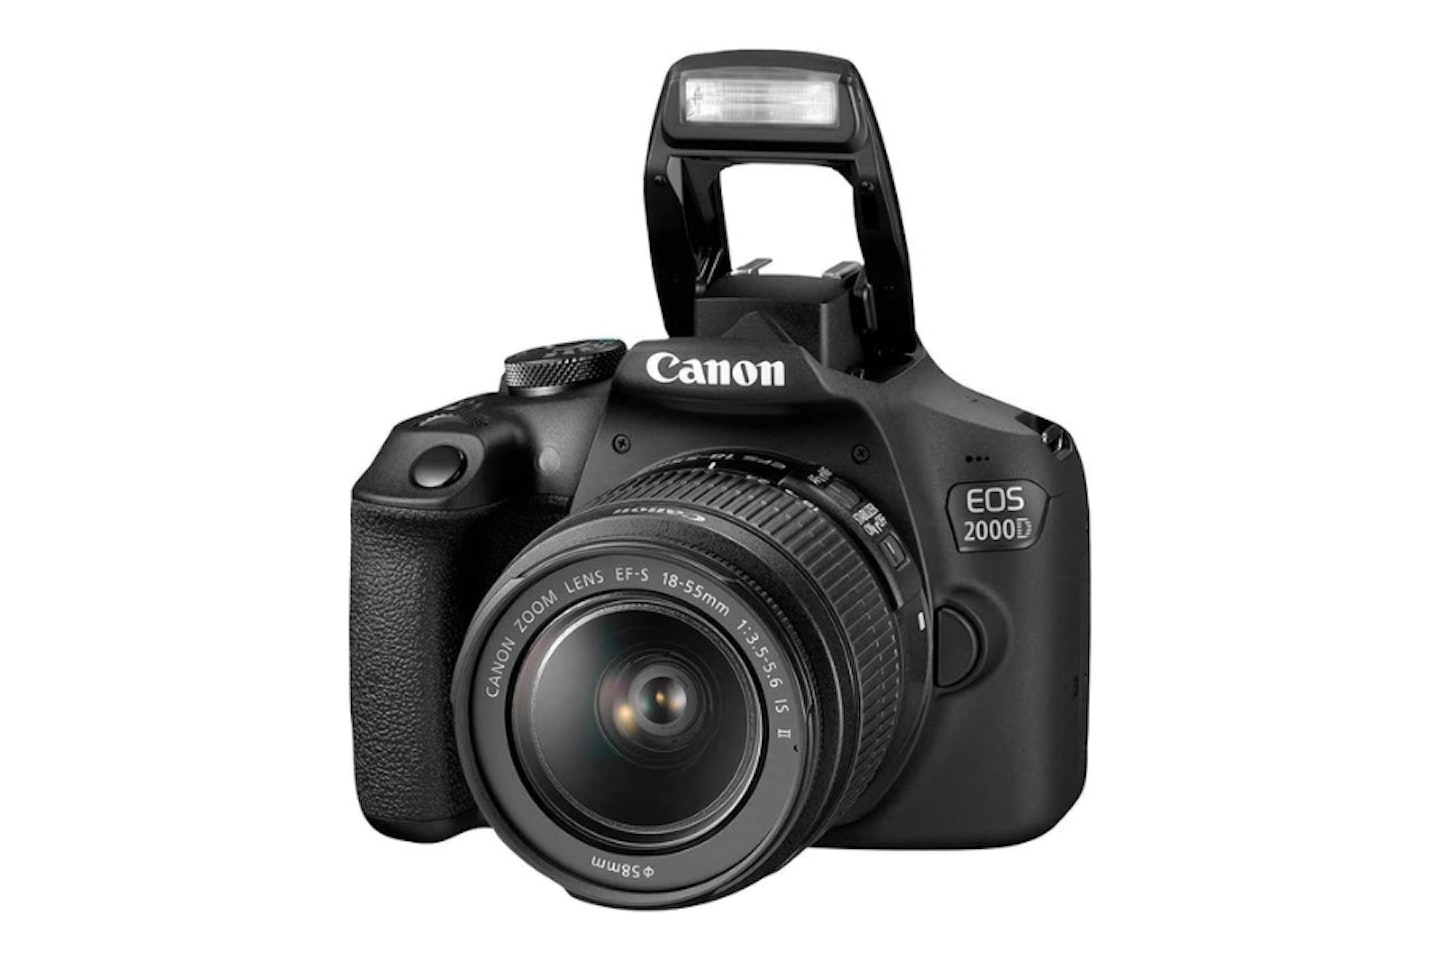 Canon EOS 2000D - one of the best entry-level cameras